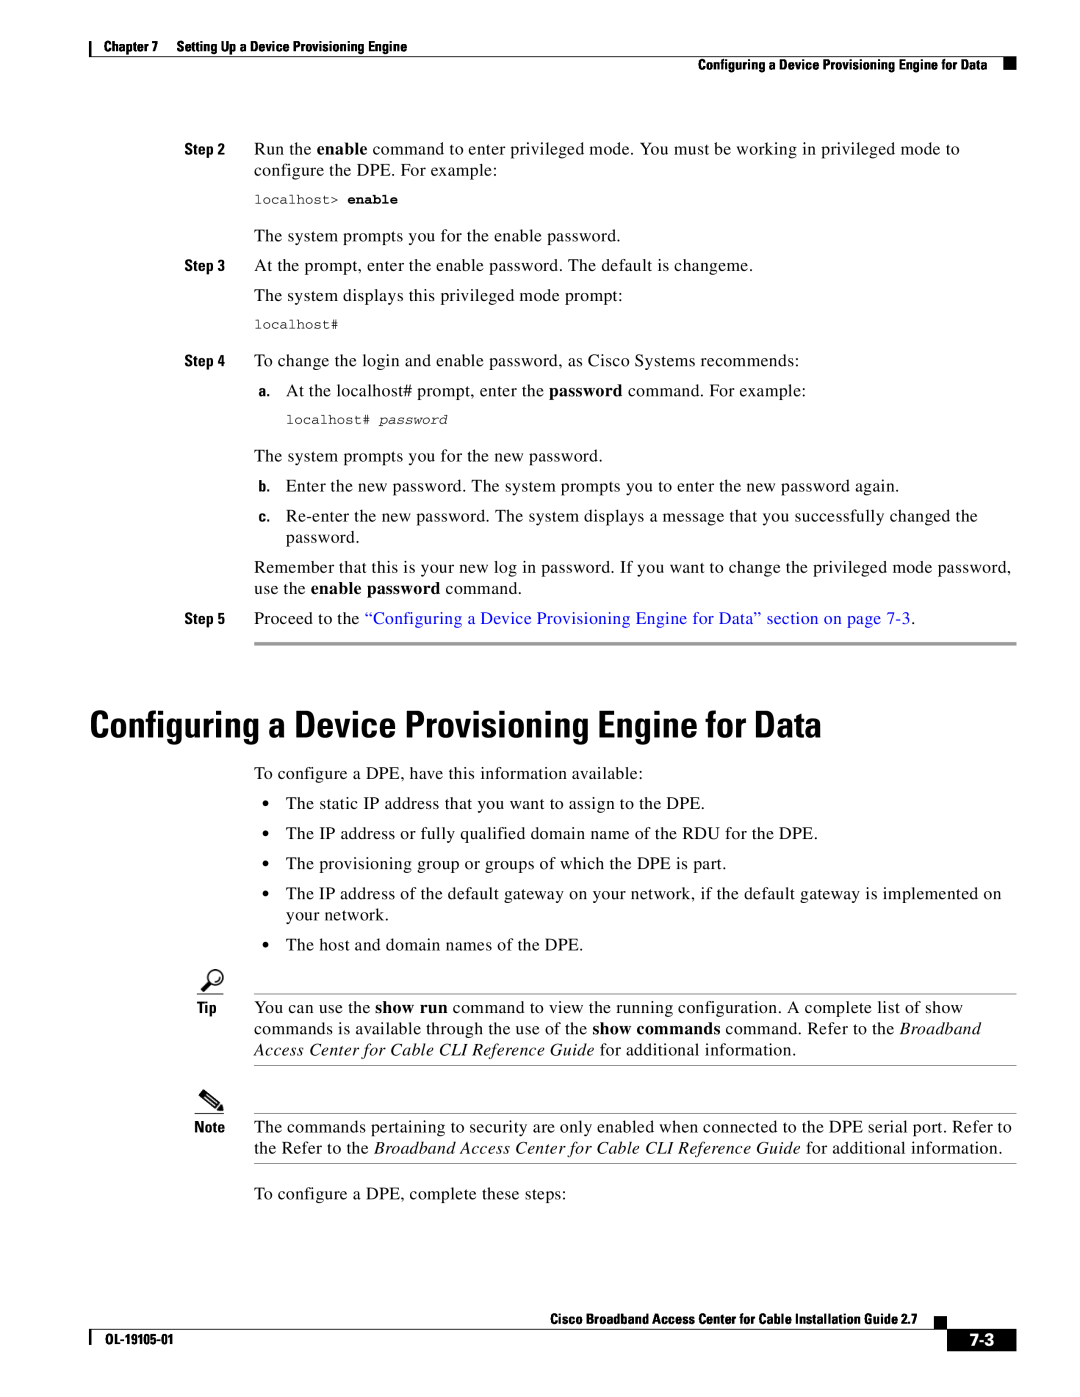 Cisco Systems Broadband Access Center manual Configuring a Device Provisioning Engine for Data 